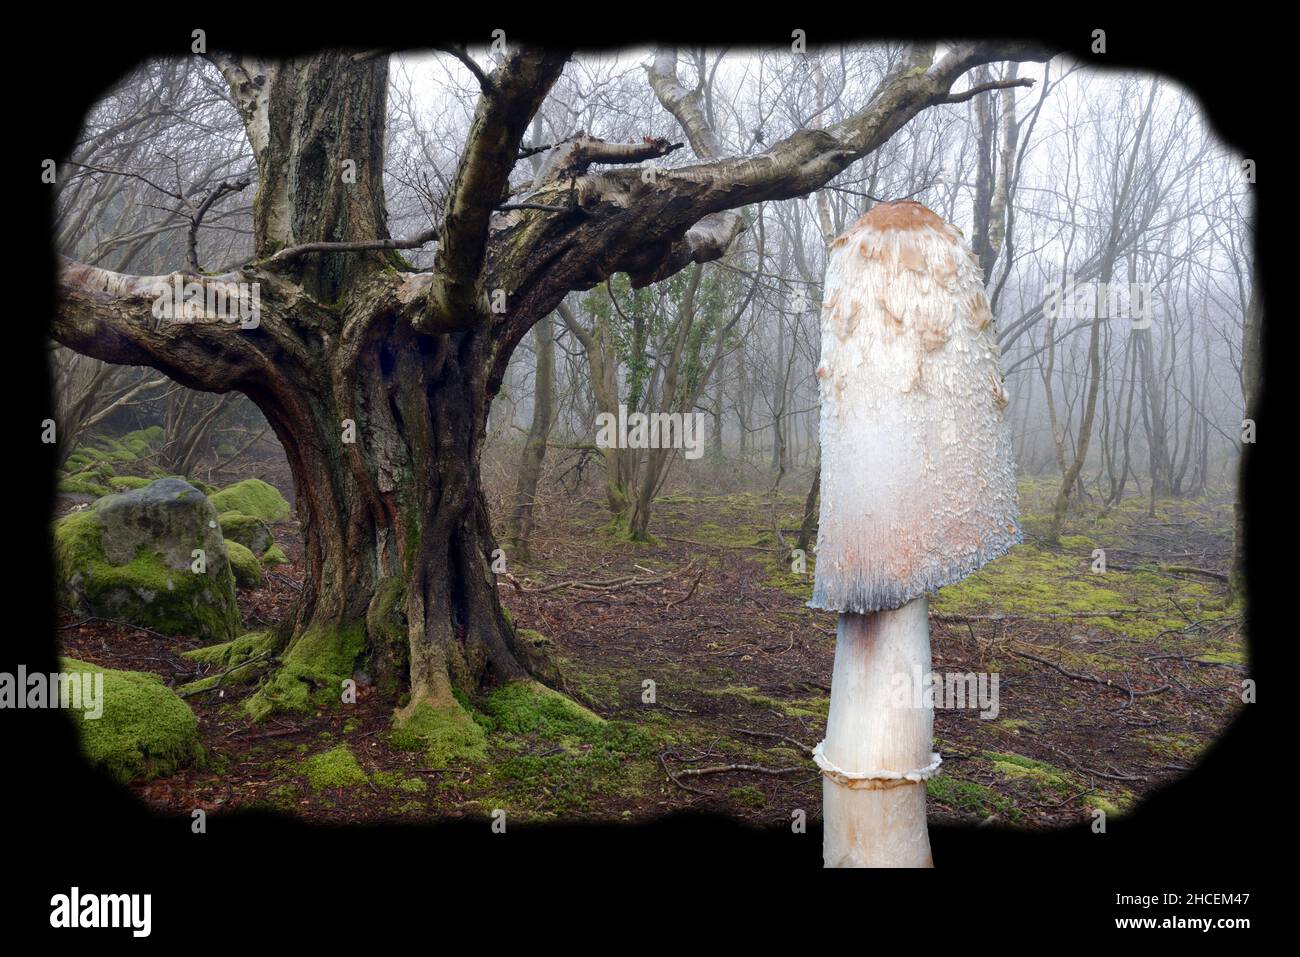 Coprinus comatus (shaggy inkcap) is here shown with woodland habitat in Snowdonia (background) where it is likely to be found. Stock Photo